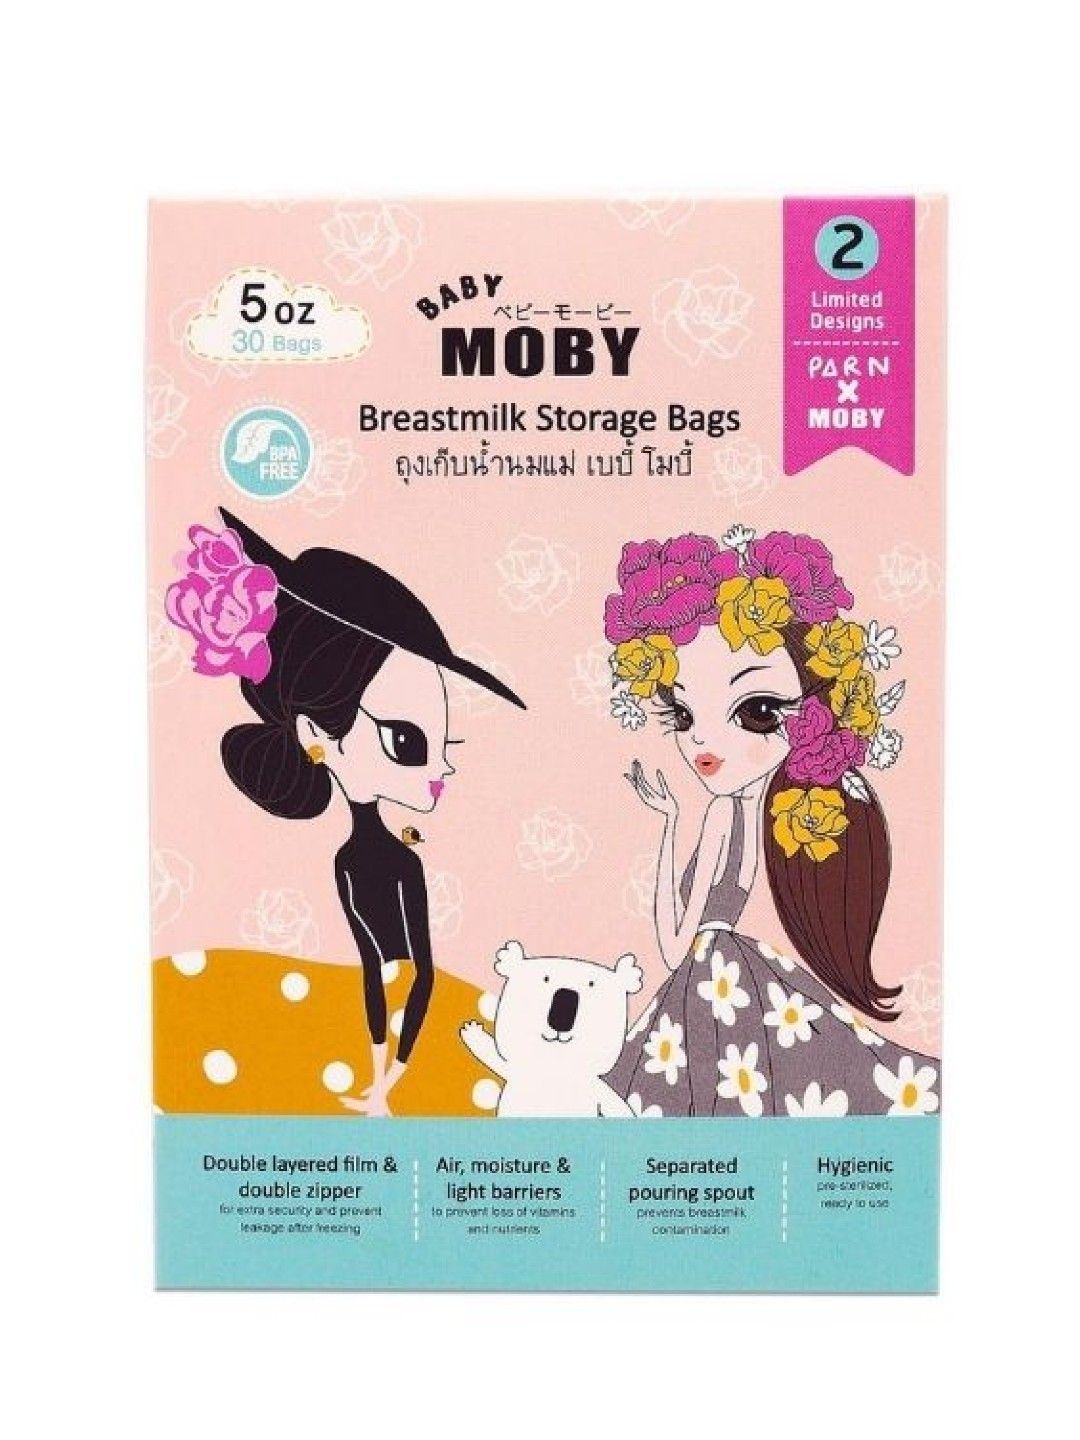 Baby Moby Limited Edition Parn x Moby Breastmilk Storage Bags (5oz/150mL) (No Color- Image 3)